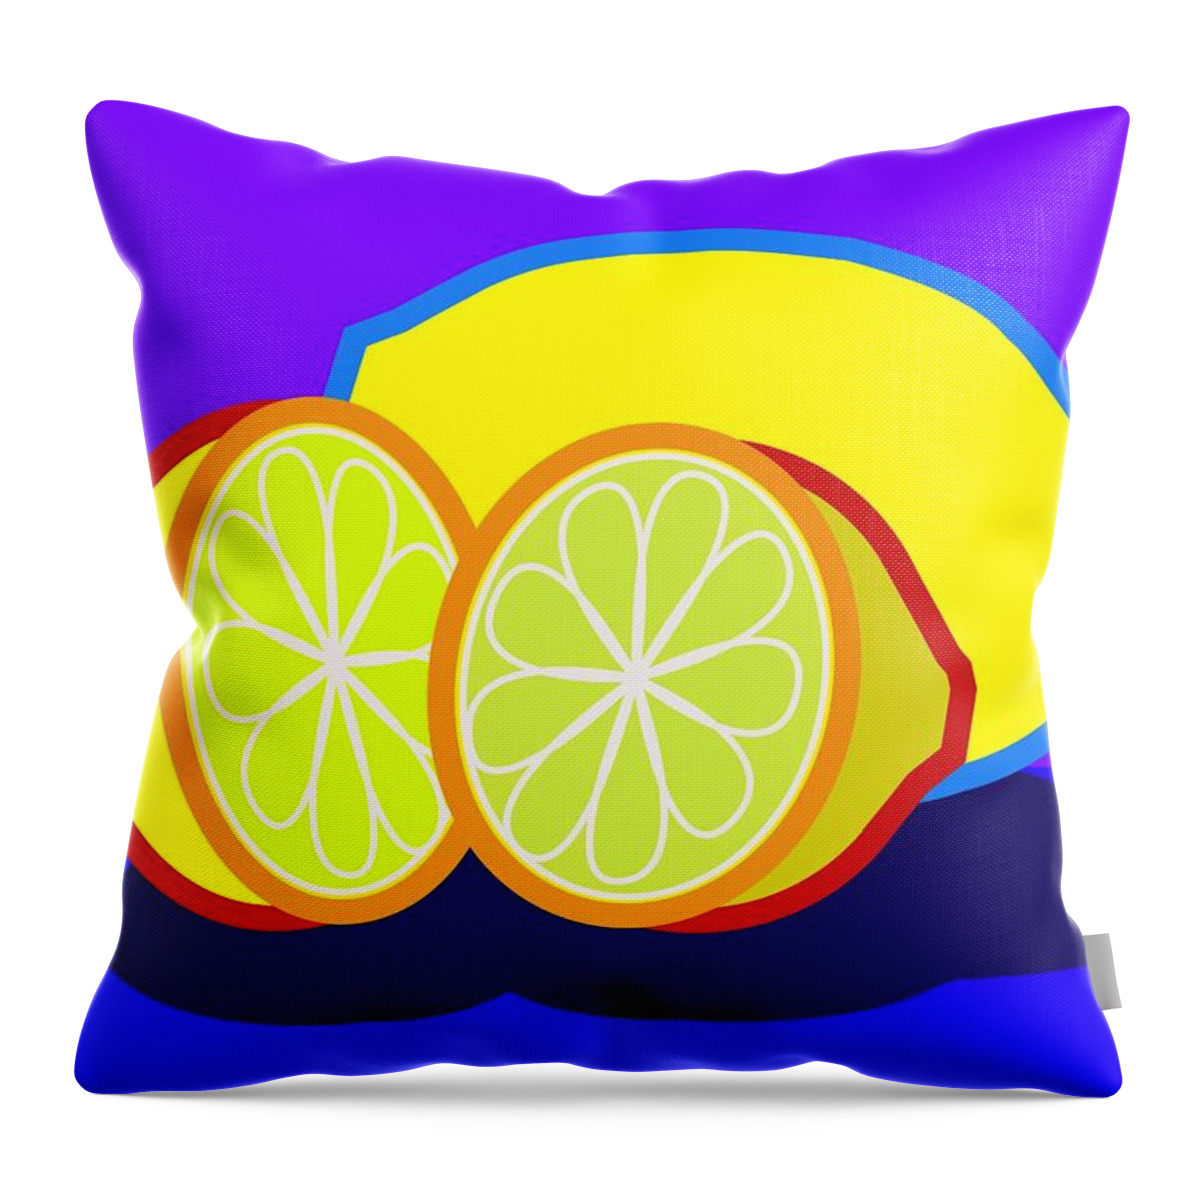 Yellow Throw Pillow featuring the digital art Mellow Yellow by Fatline Graphic Art